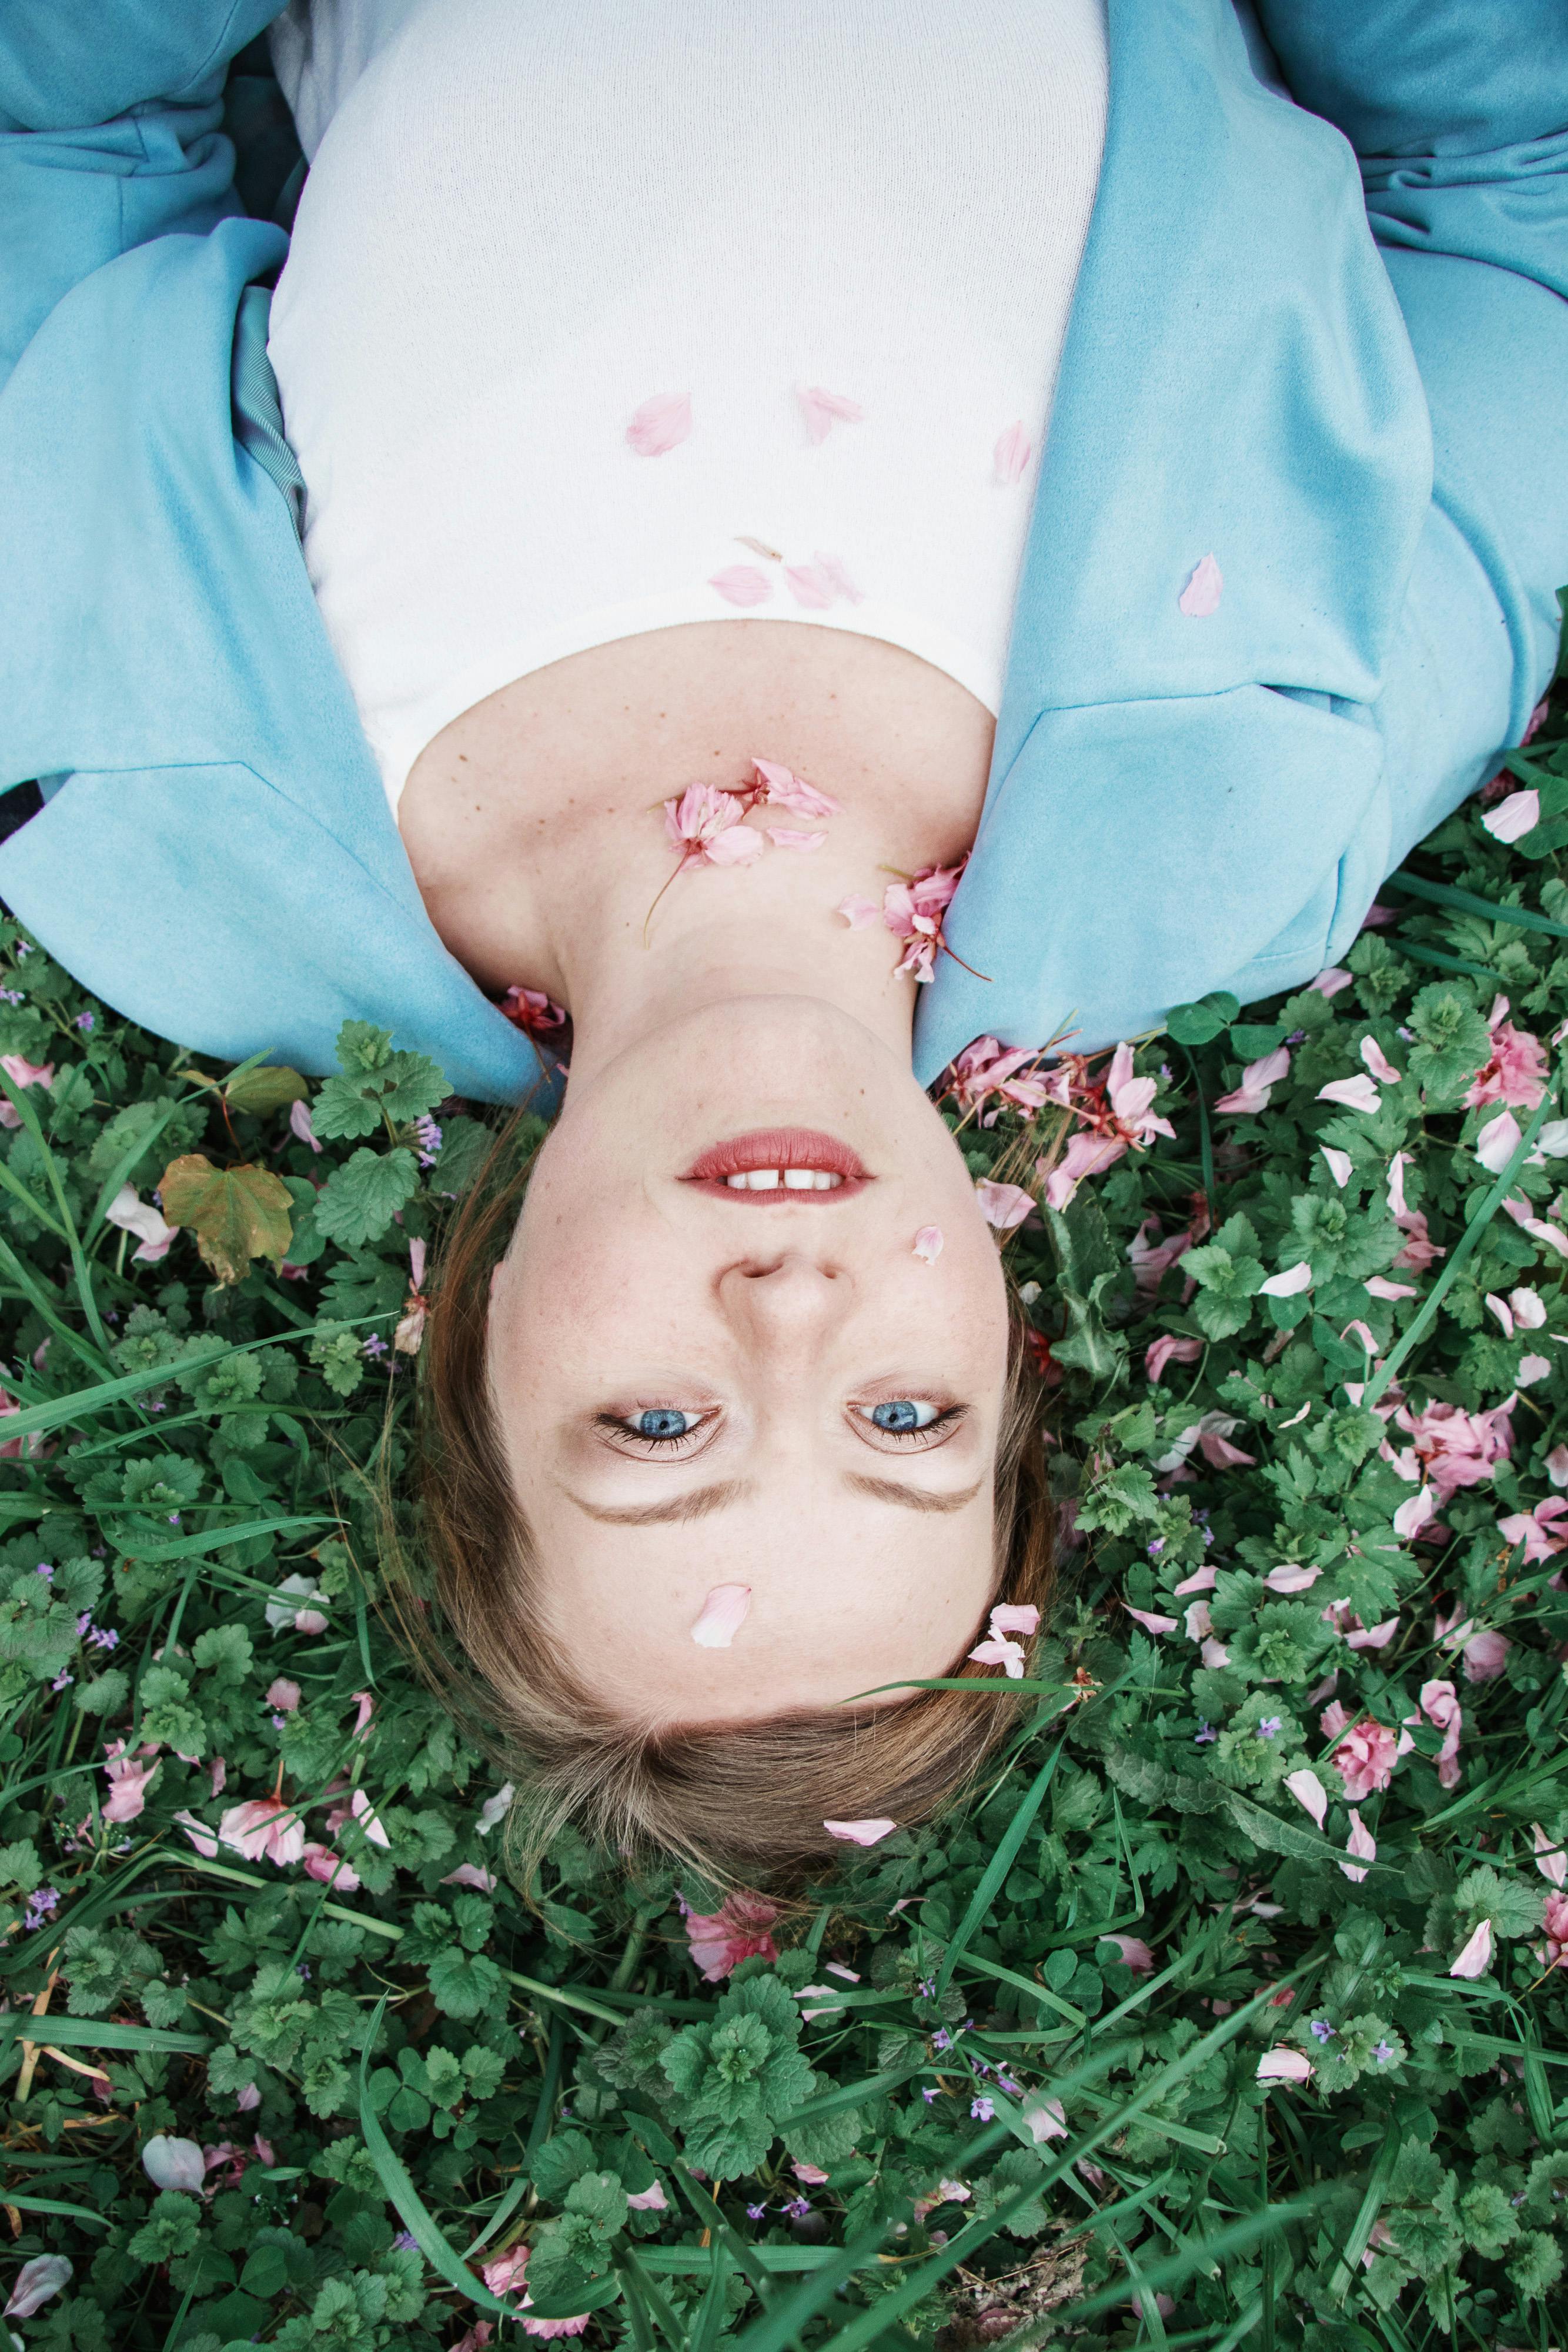 Woman in Blue Shirt Lying on Green Grass · Free Stock Photo